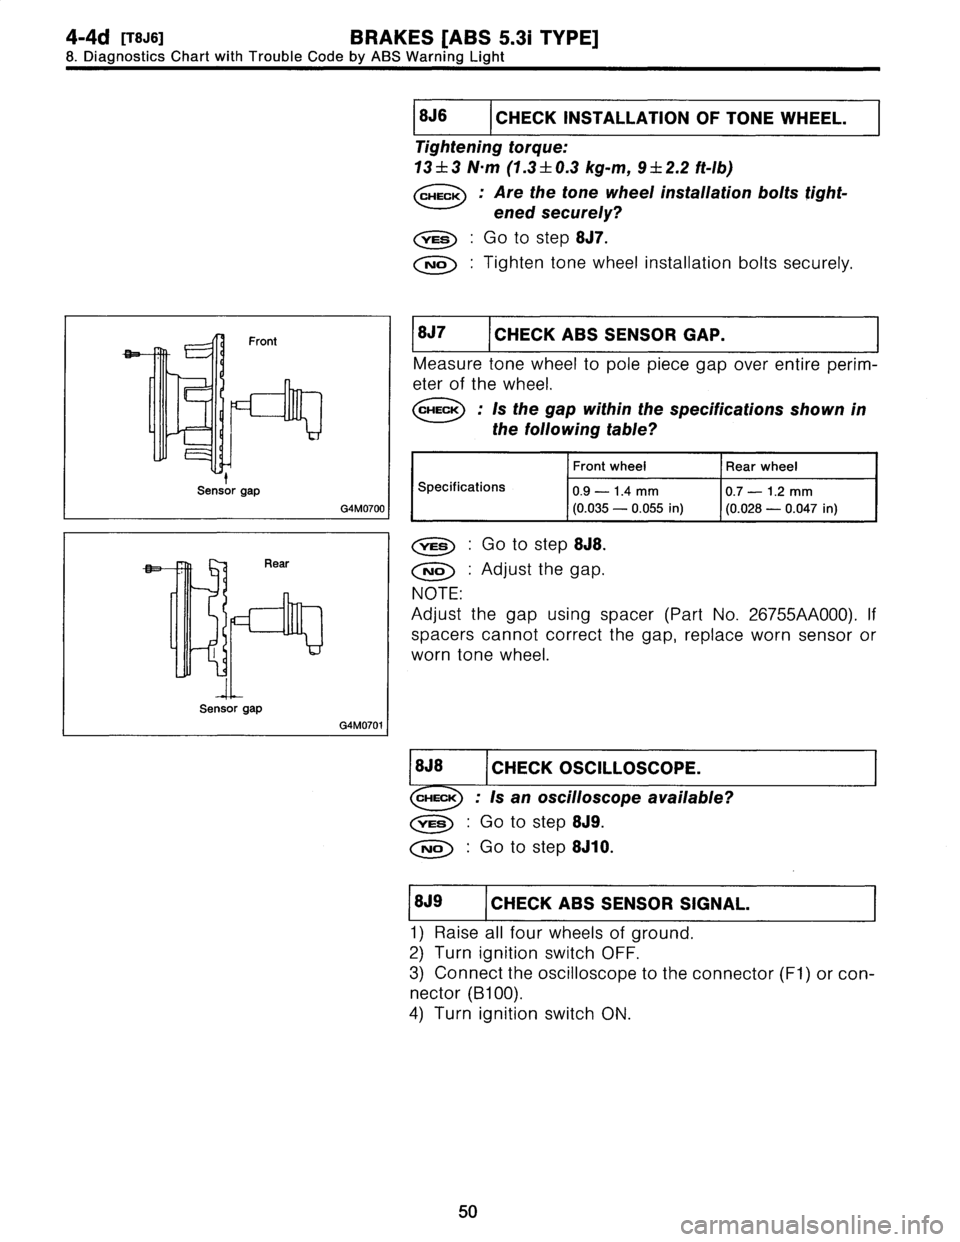 SUBARU LEGACY 1997  Service Repair Manual 
4-4d
[TSJs1
BRAKES
[ABS
5
.31
TYPE]

8
.
Diagnostics
Chart
with
Trouble
Code
by
ABS
Warning
Light

G4M0700
I

G4M0701

CHECK
INSTALLATION
OF
TONE
WHEEL
.

Tightening
torque
:

13
f
3
N~m
(1.3
f
0
.3
